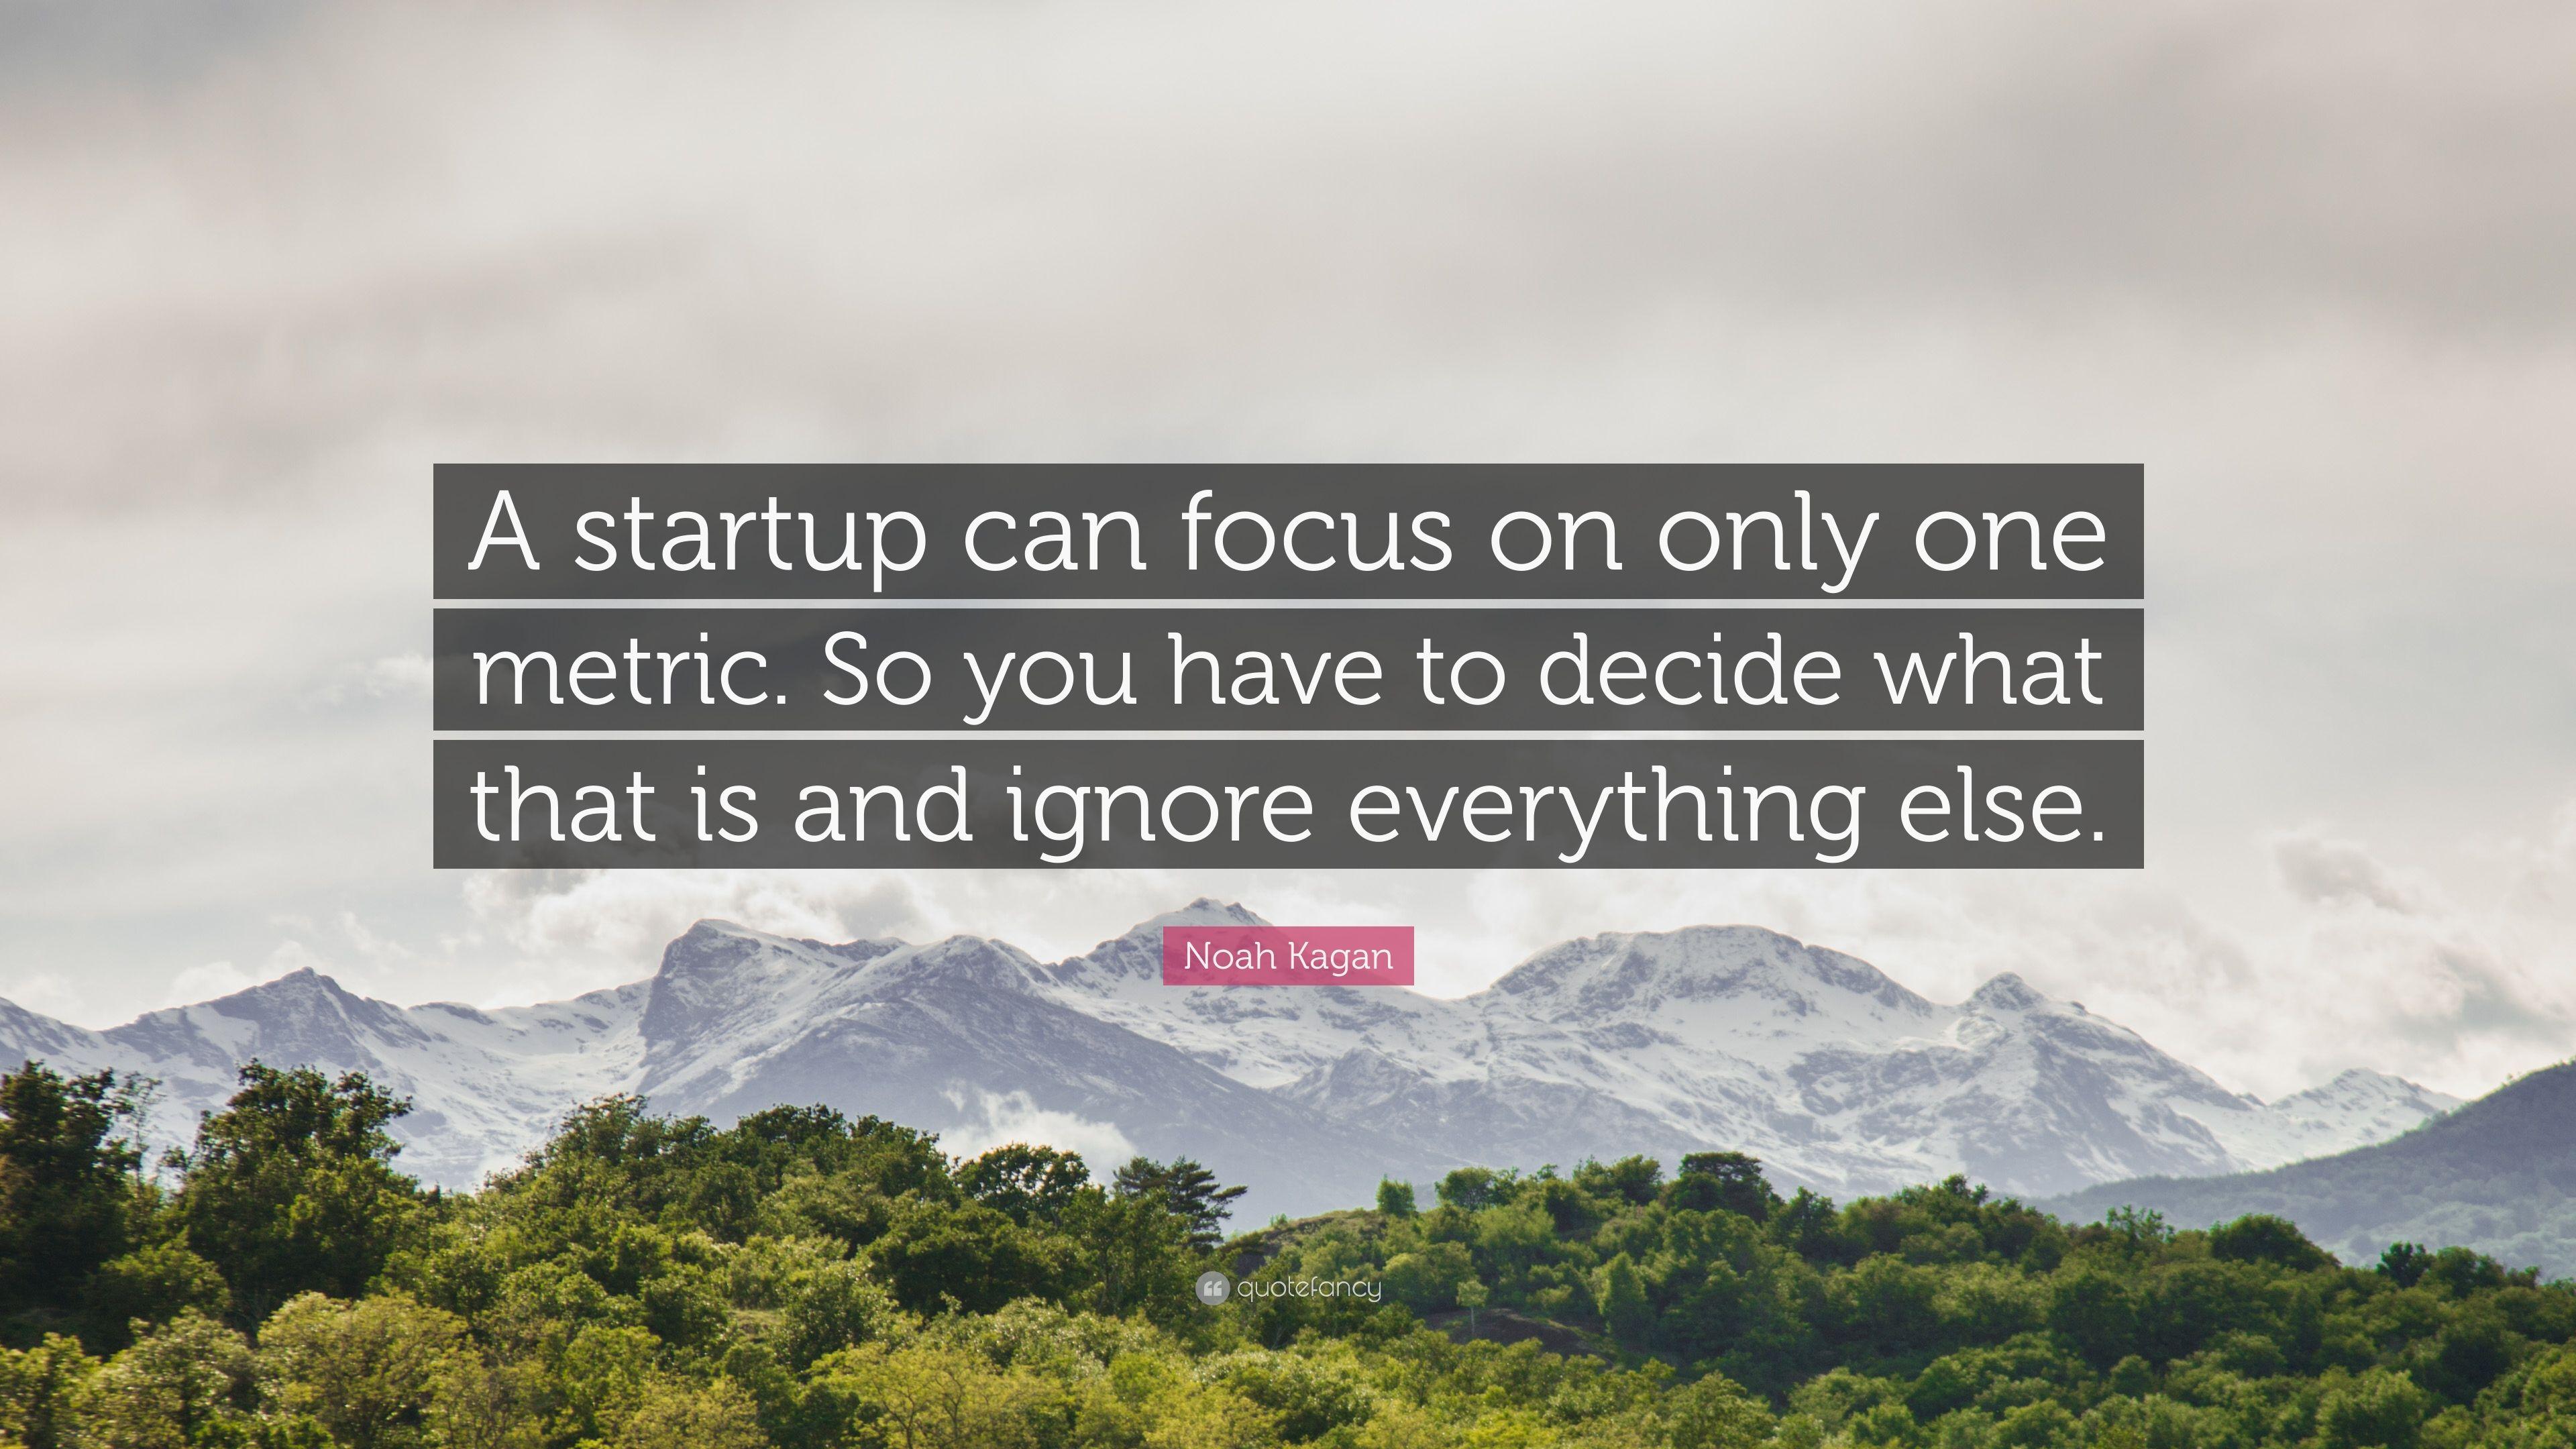 Noah Kagan Quote: “A startup can focus on only one metric. So you